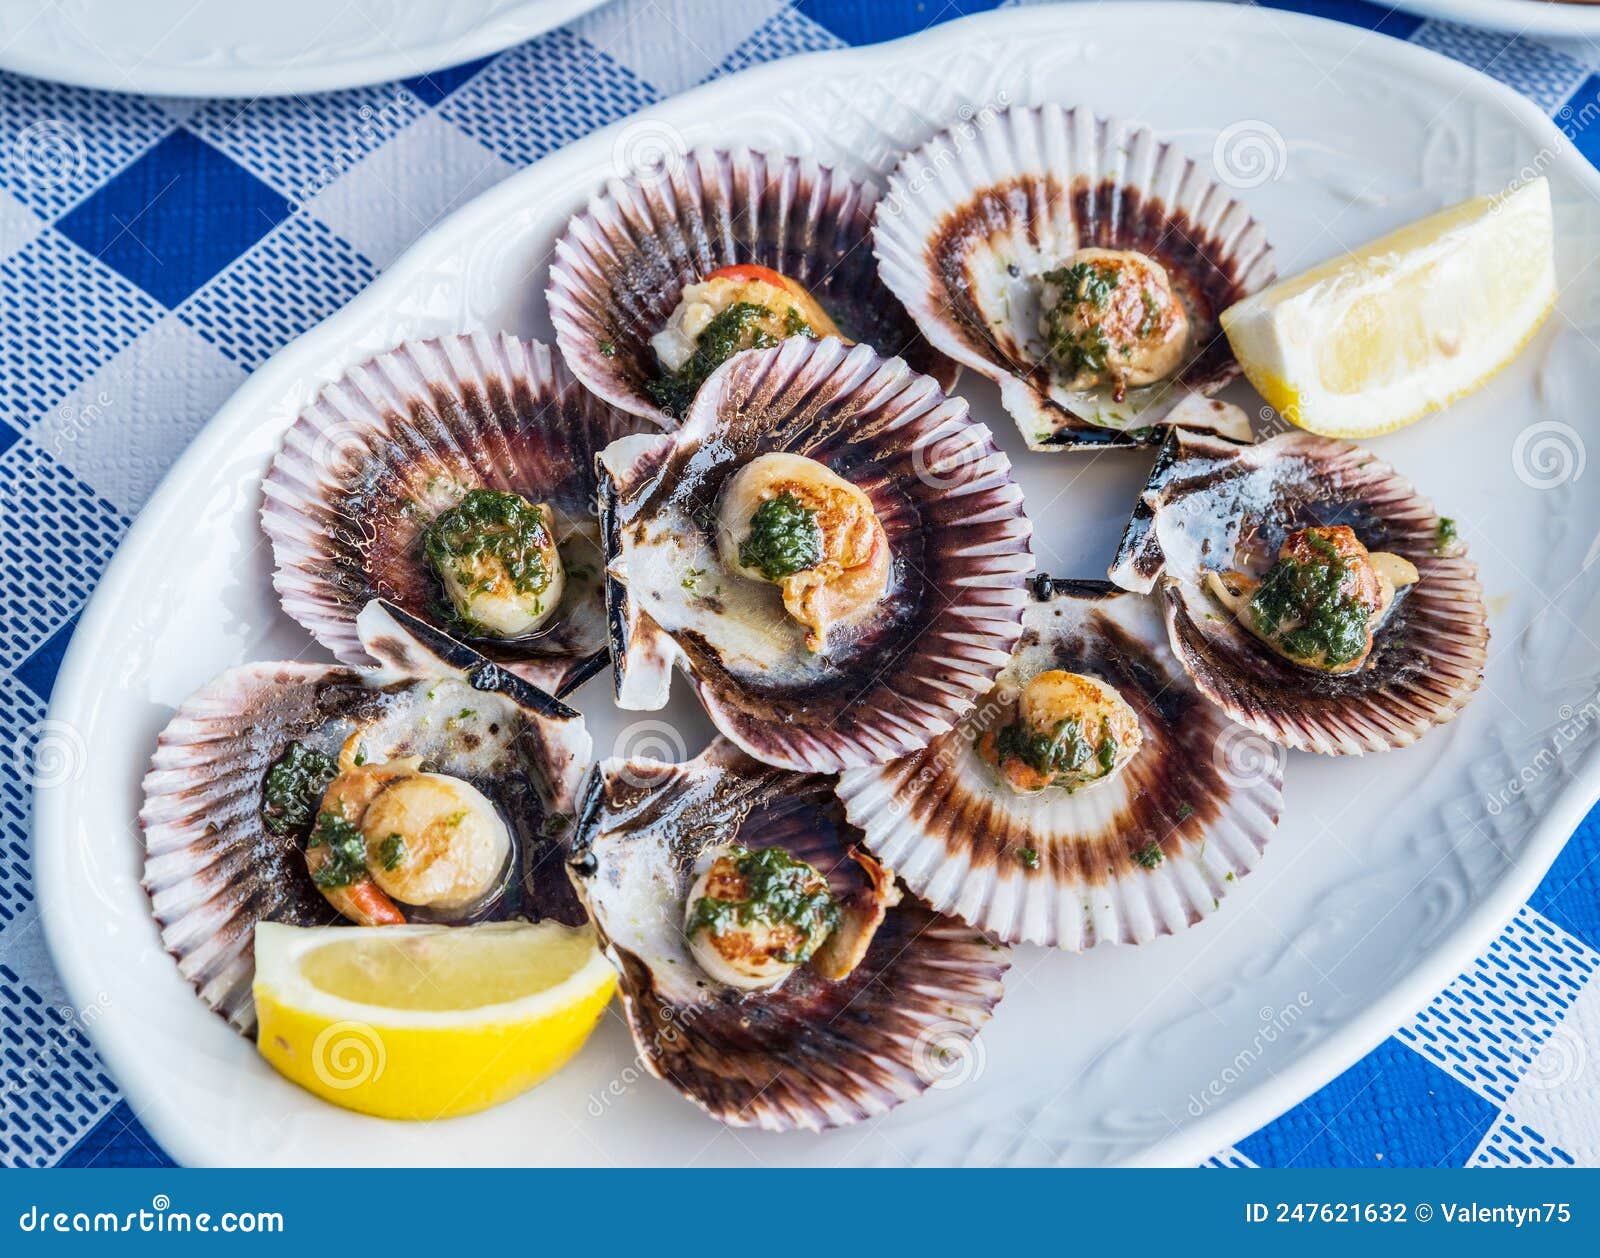 `lapas` or true limpets with green moyo - traditional seafood of tenerife and madeira islands